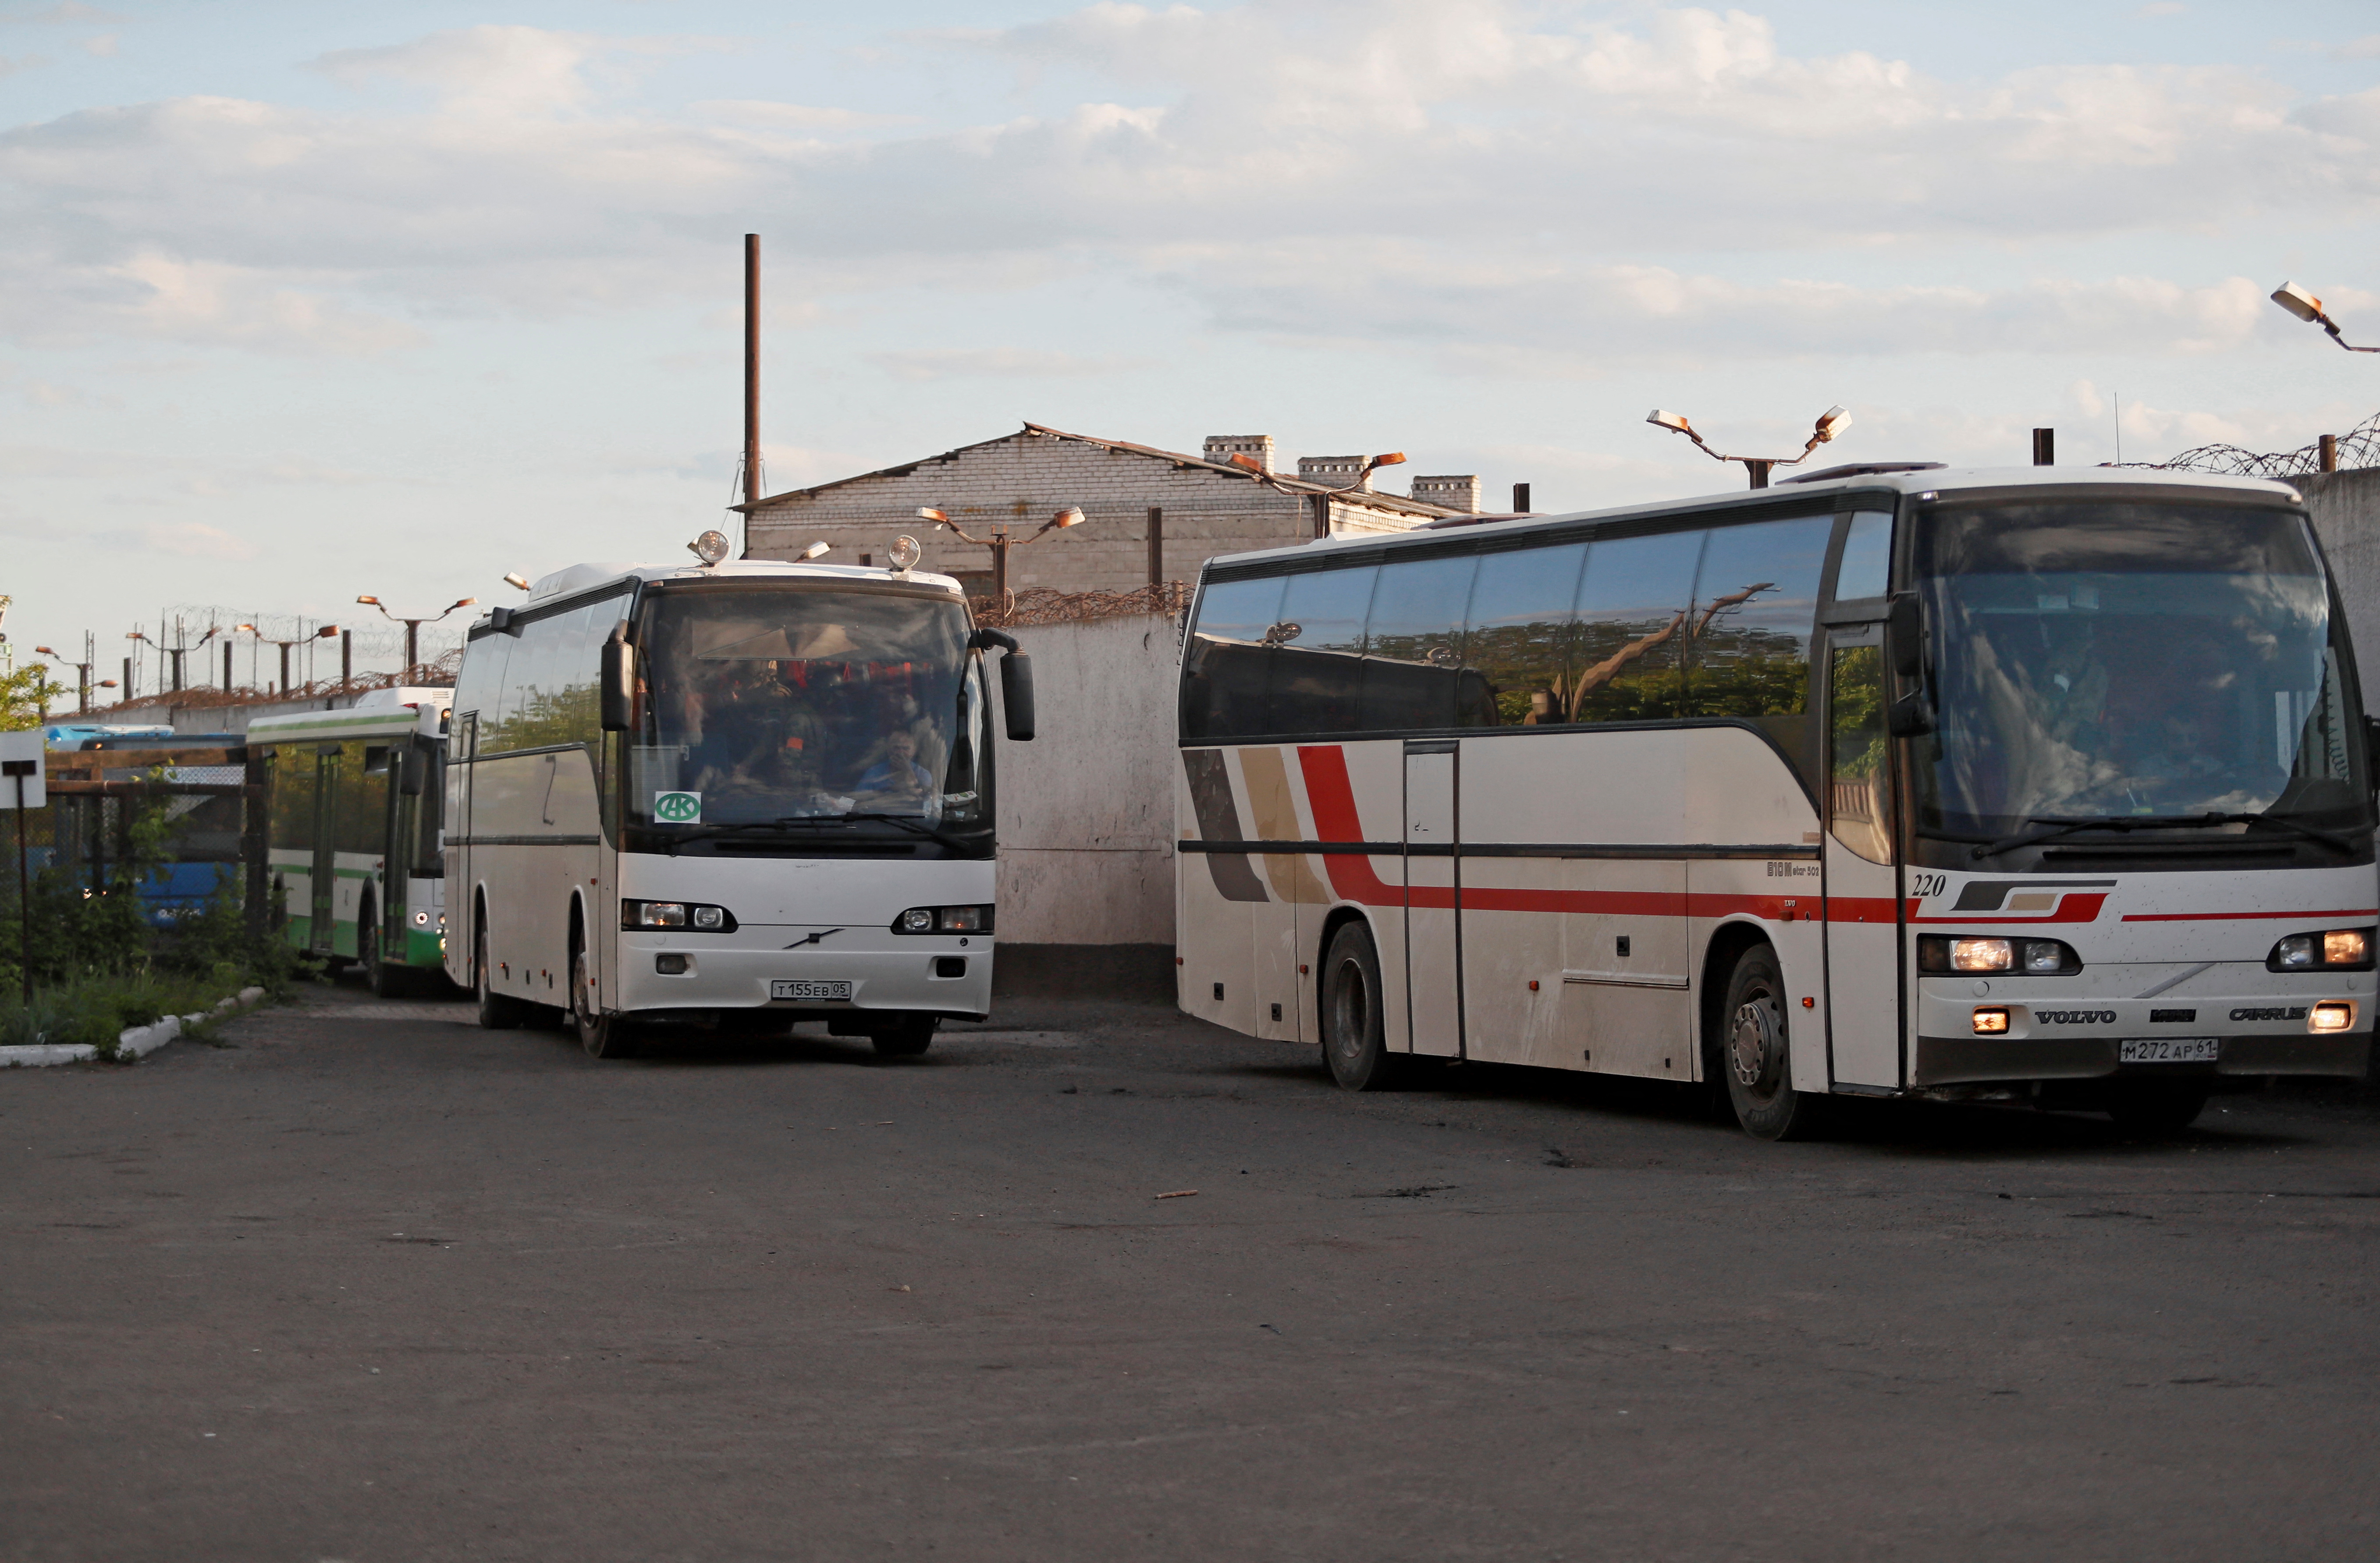 Buses carrying service members of Ukrainian forces who have surrendered after weeks holed up at Azovstal steel works arrive in Olenivka